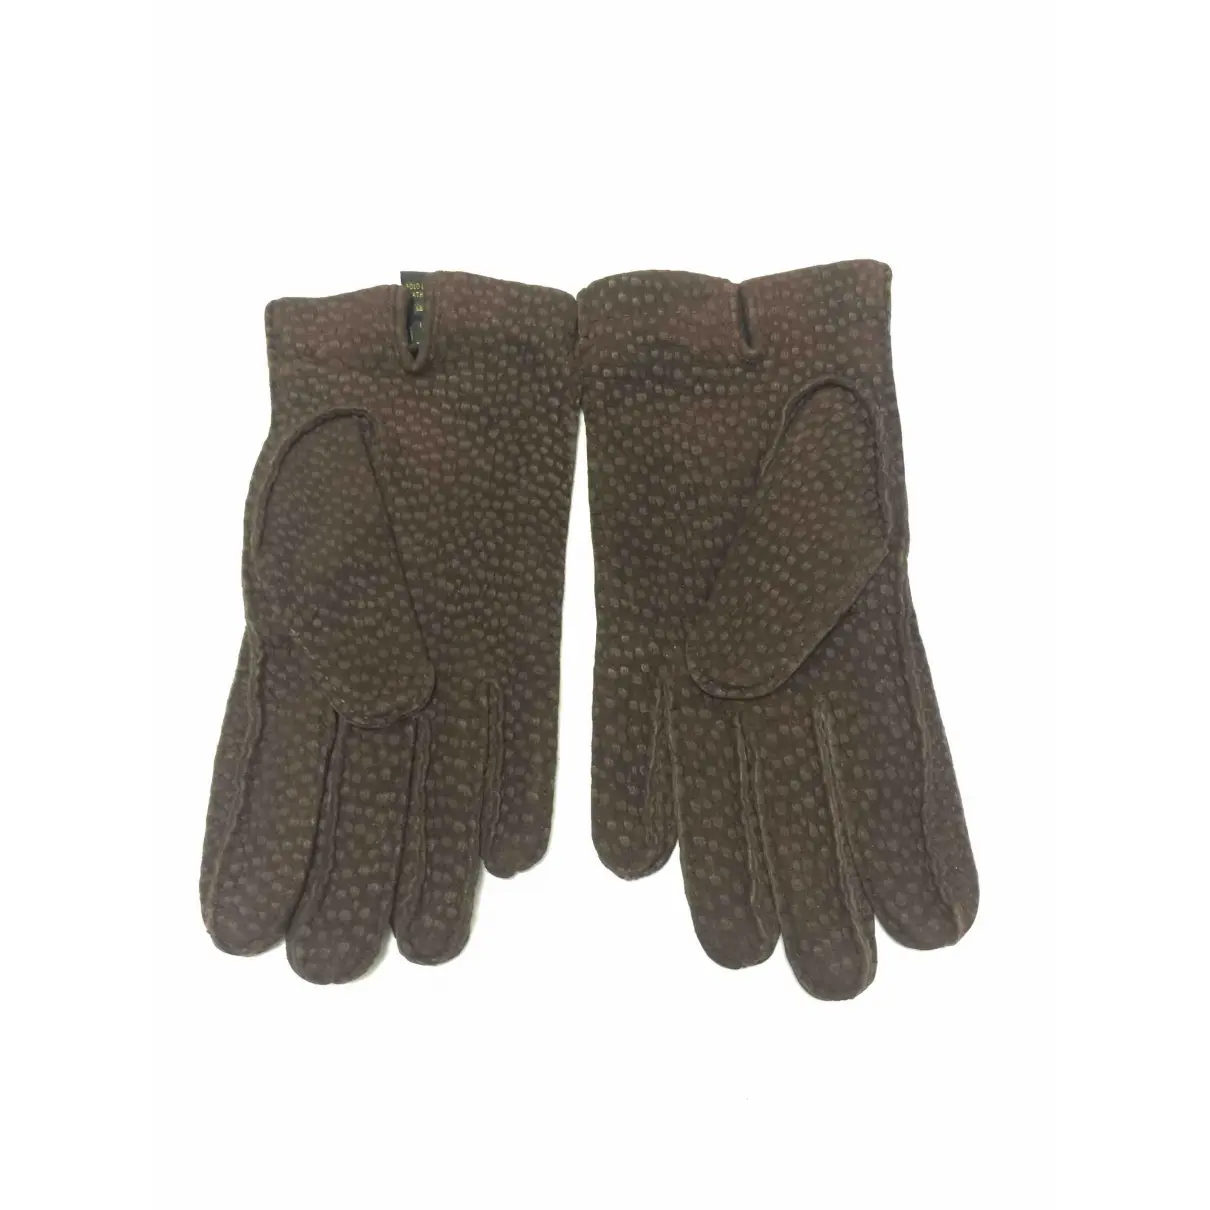 Buy Loro Piana Exotic leathers gloves online